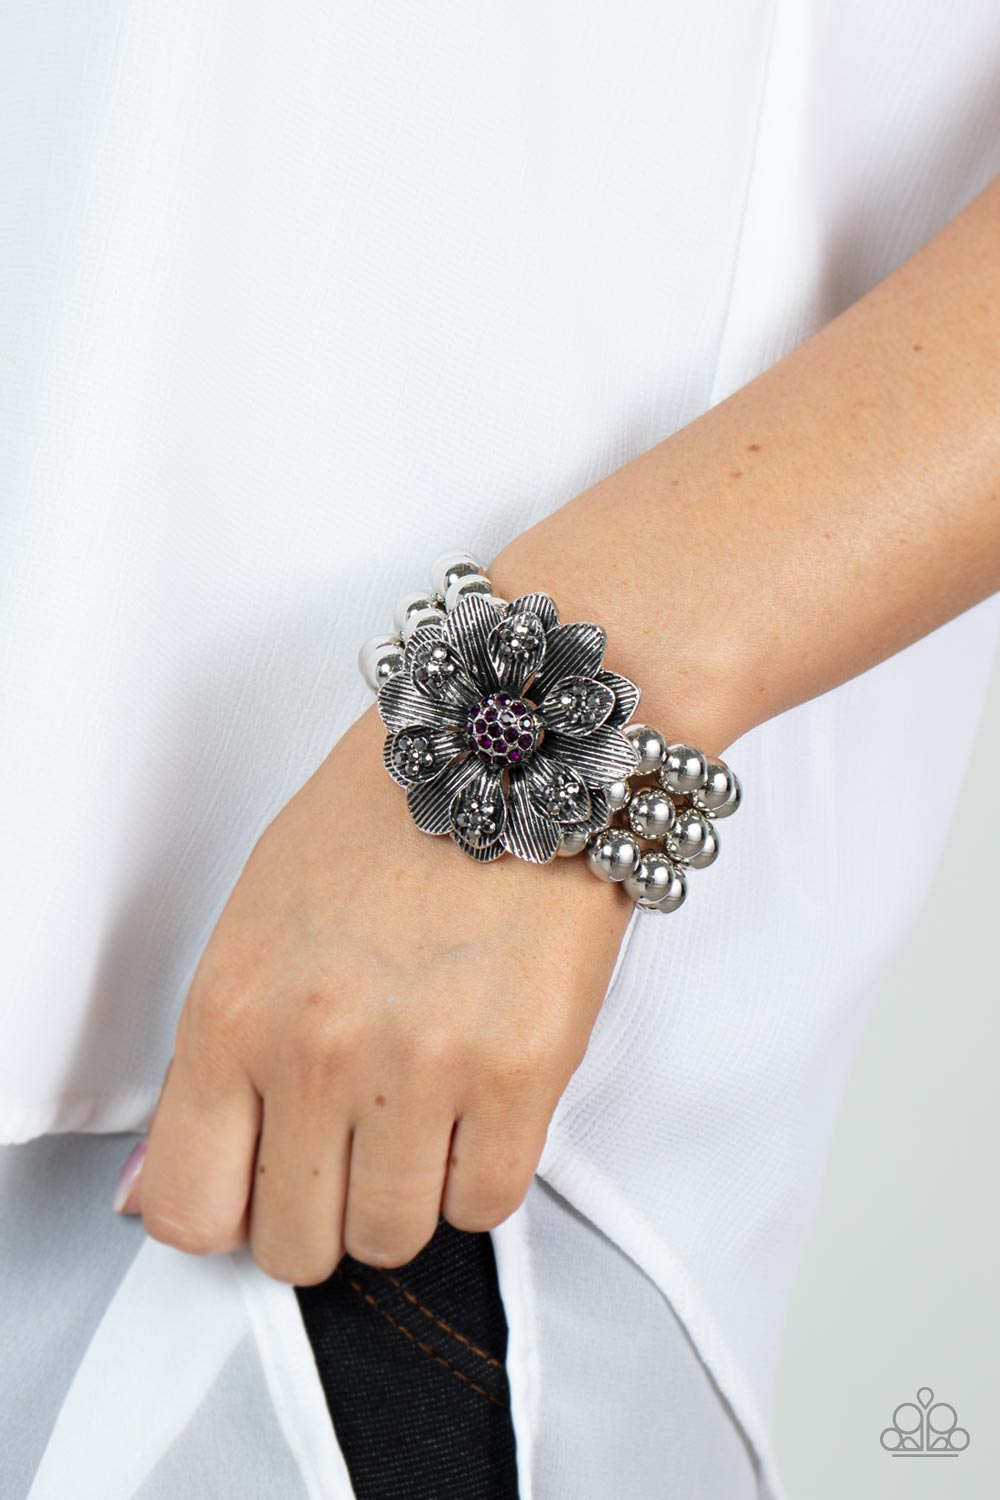 Botanical Bravado Purple Bracelet - Paparazzi Accessories  A daring oversized silver flower is composed of petals lined in antiqued silver and dotted with smoky hematite rhinestones. A sphere of dainty purple rhinestones creates the center of the flower as it sits atop a trio of shiny silver beaded stretchy bands around the wrist for a dramatically whimsical look.  Sold as one individual bracelet.